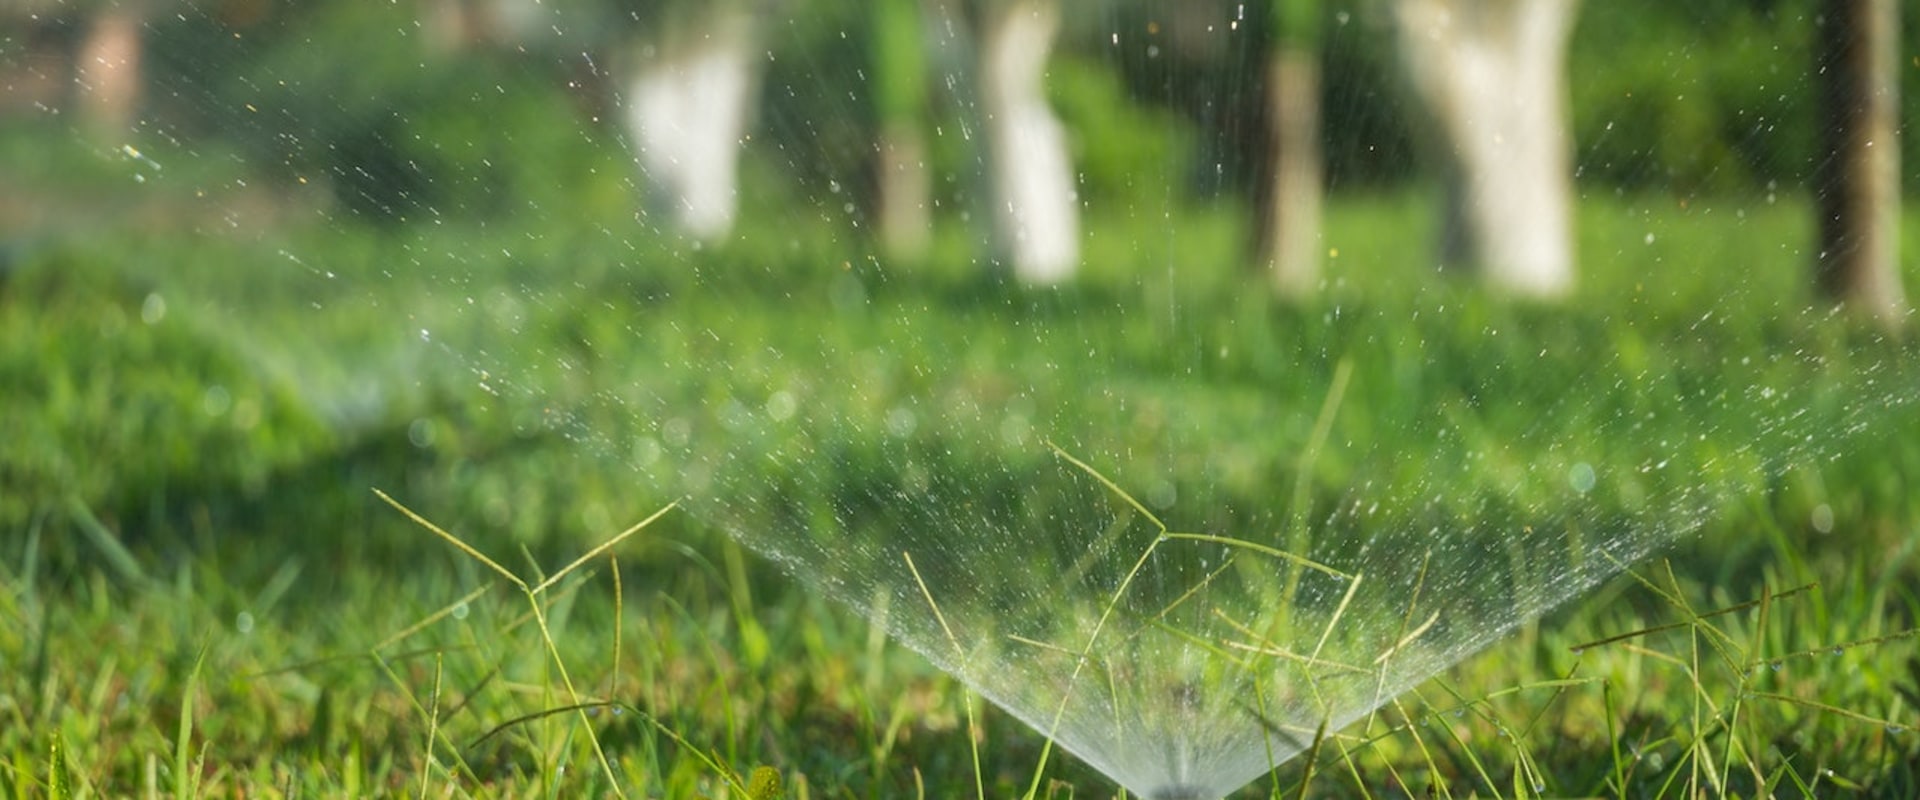 Benefits Of Hiring A Lawn Sprinkler System Contractor In Omaha That Is Knowledgeable In Landscape Engineering For Irrigation System Winterization